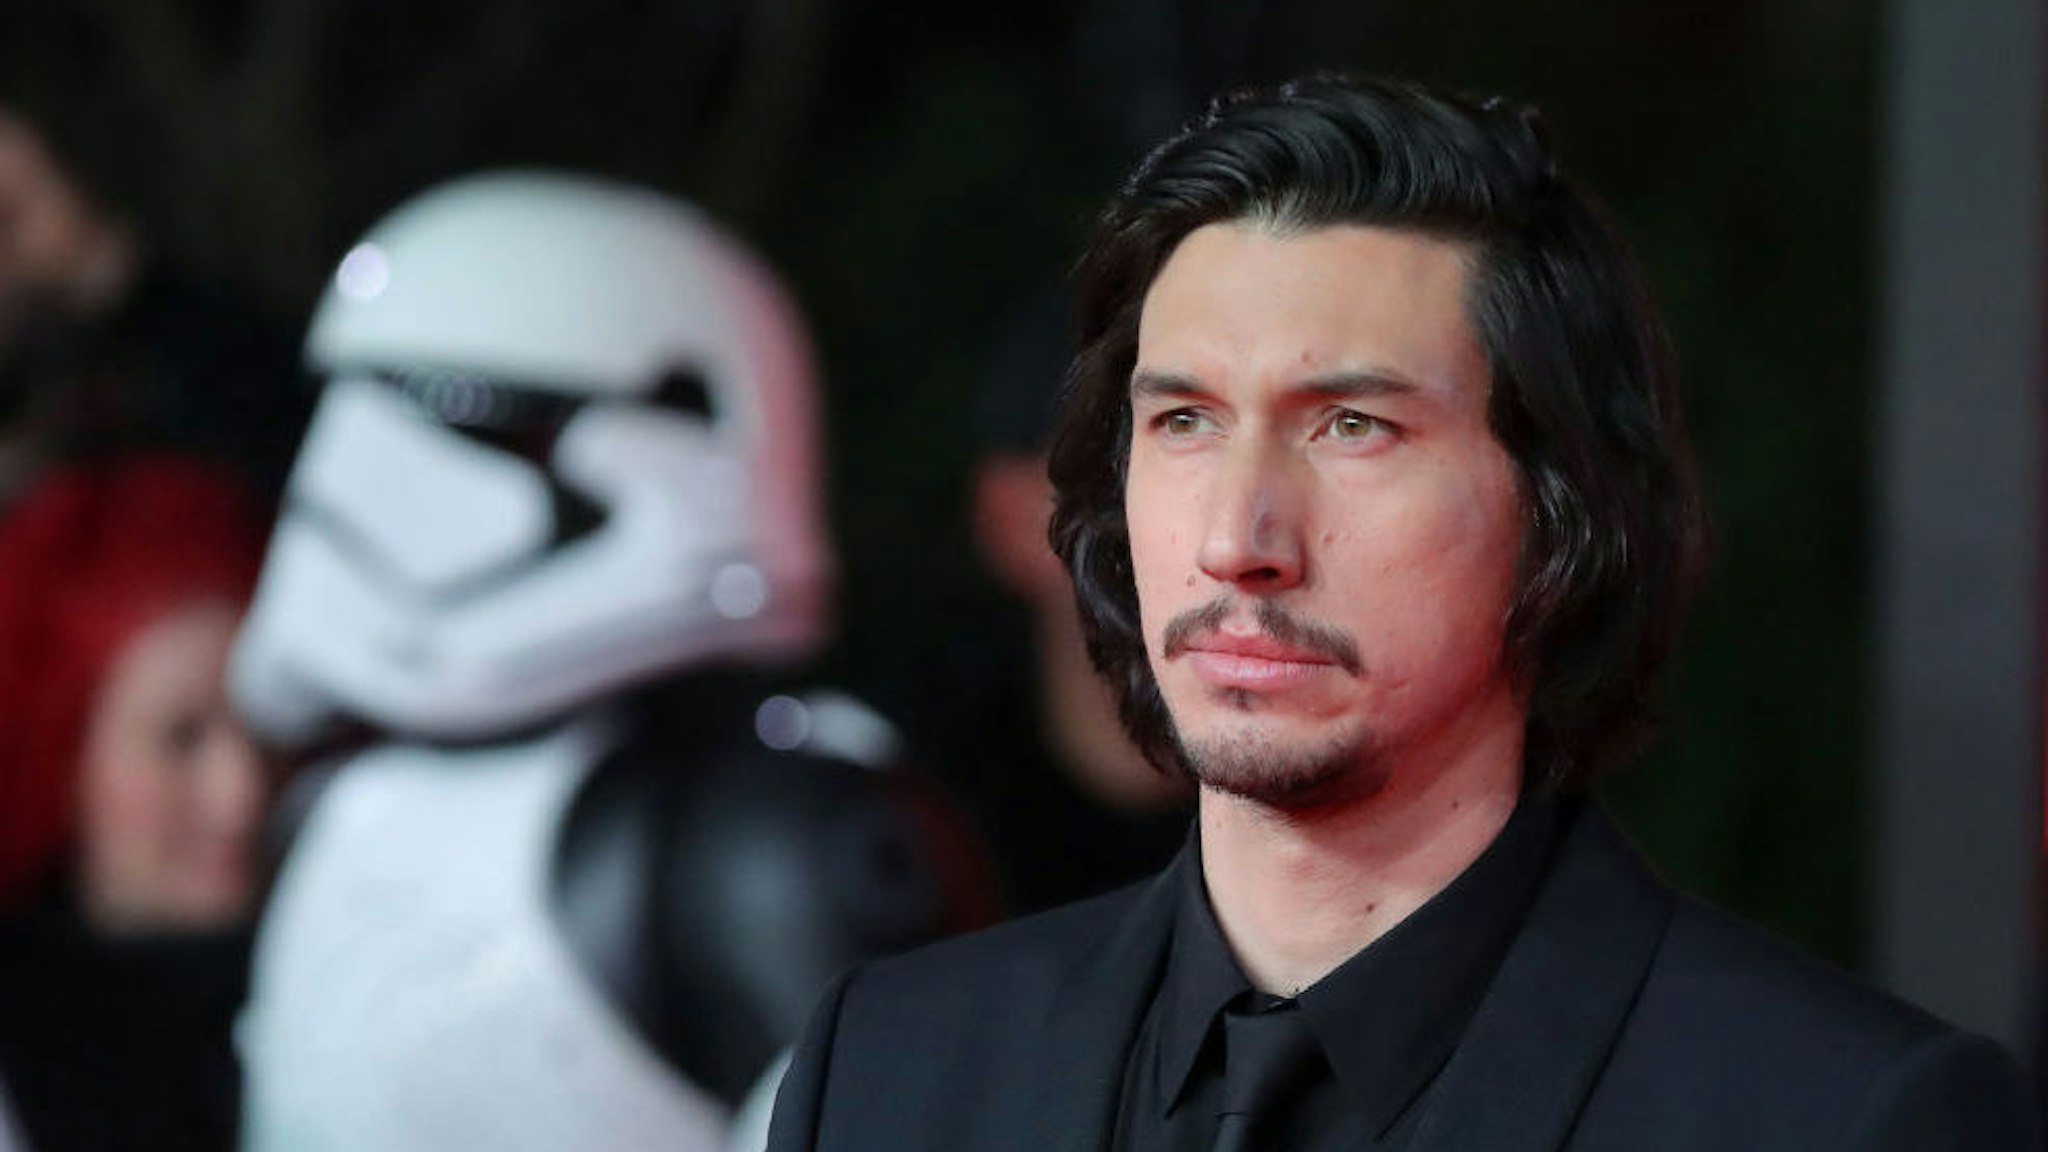 US actor Adam Driver poses on the red carpet for the European Premiere of Star Wars: The Last Jedi at the Royal Albert Hall in London on December 12, 2017. (Photo by Daniel LEAL-OLIVAS / AFP) (Photo credit should read DANIEL LEAL-OLIVAS/AFP via Getty Images)